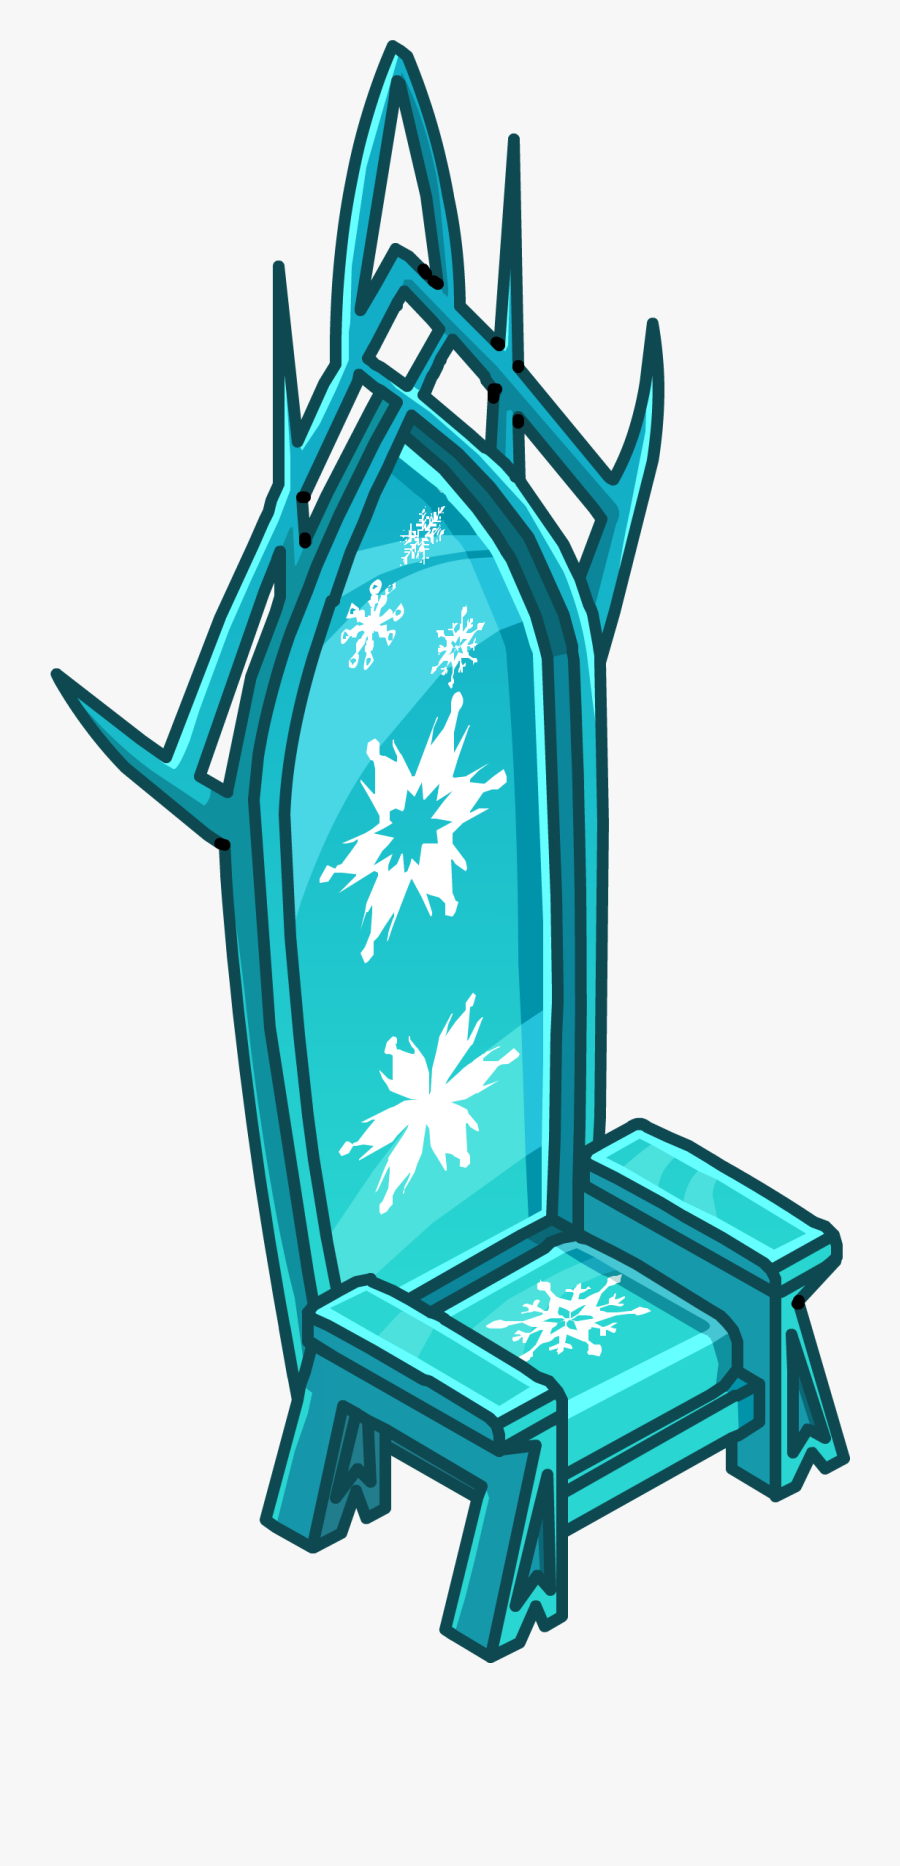 Download Frozen Throne Png - Ice Chair In Frozen , Free Transparent ...